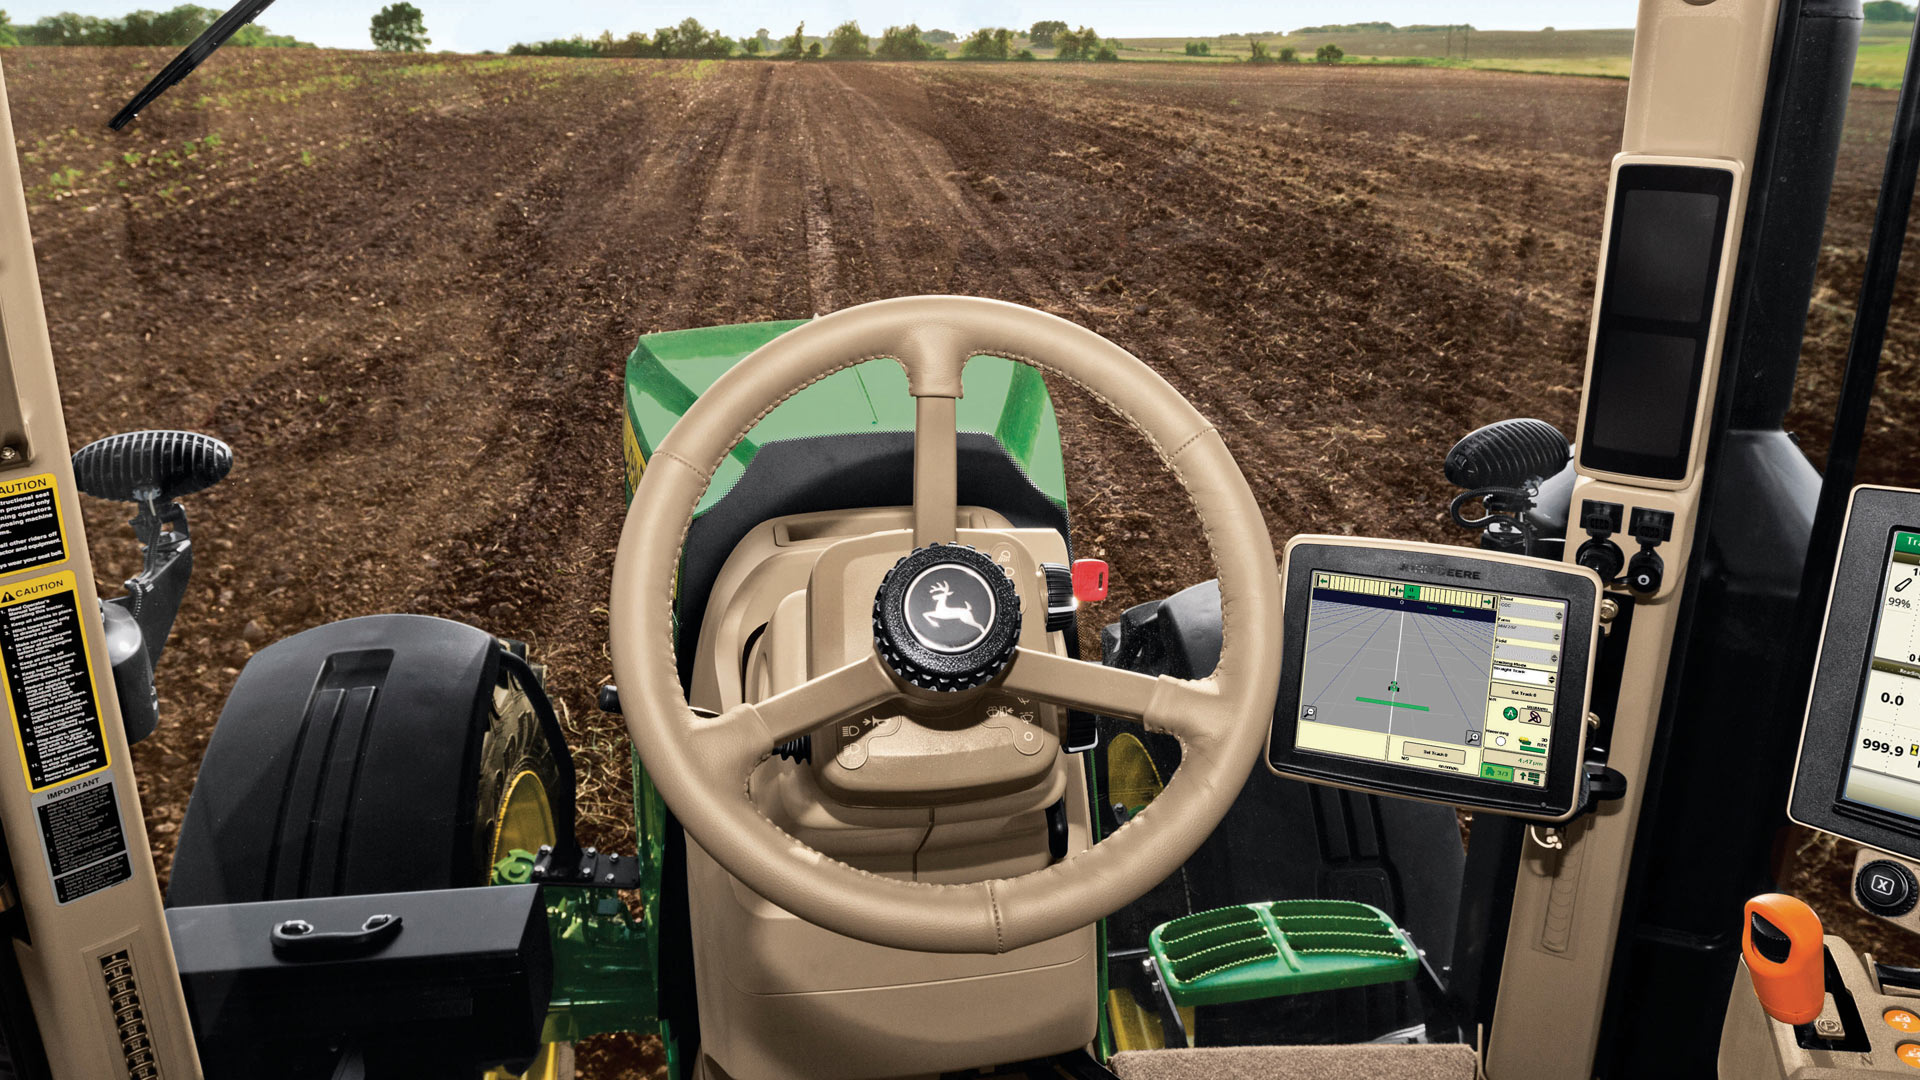 View of a unplanted field from a tractor cab